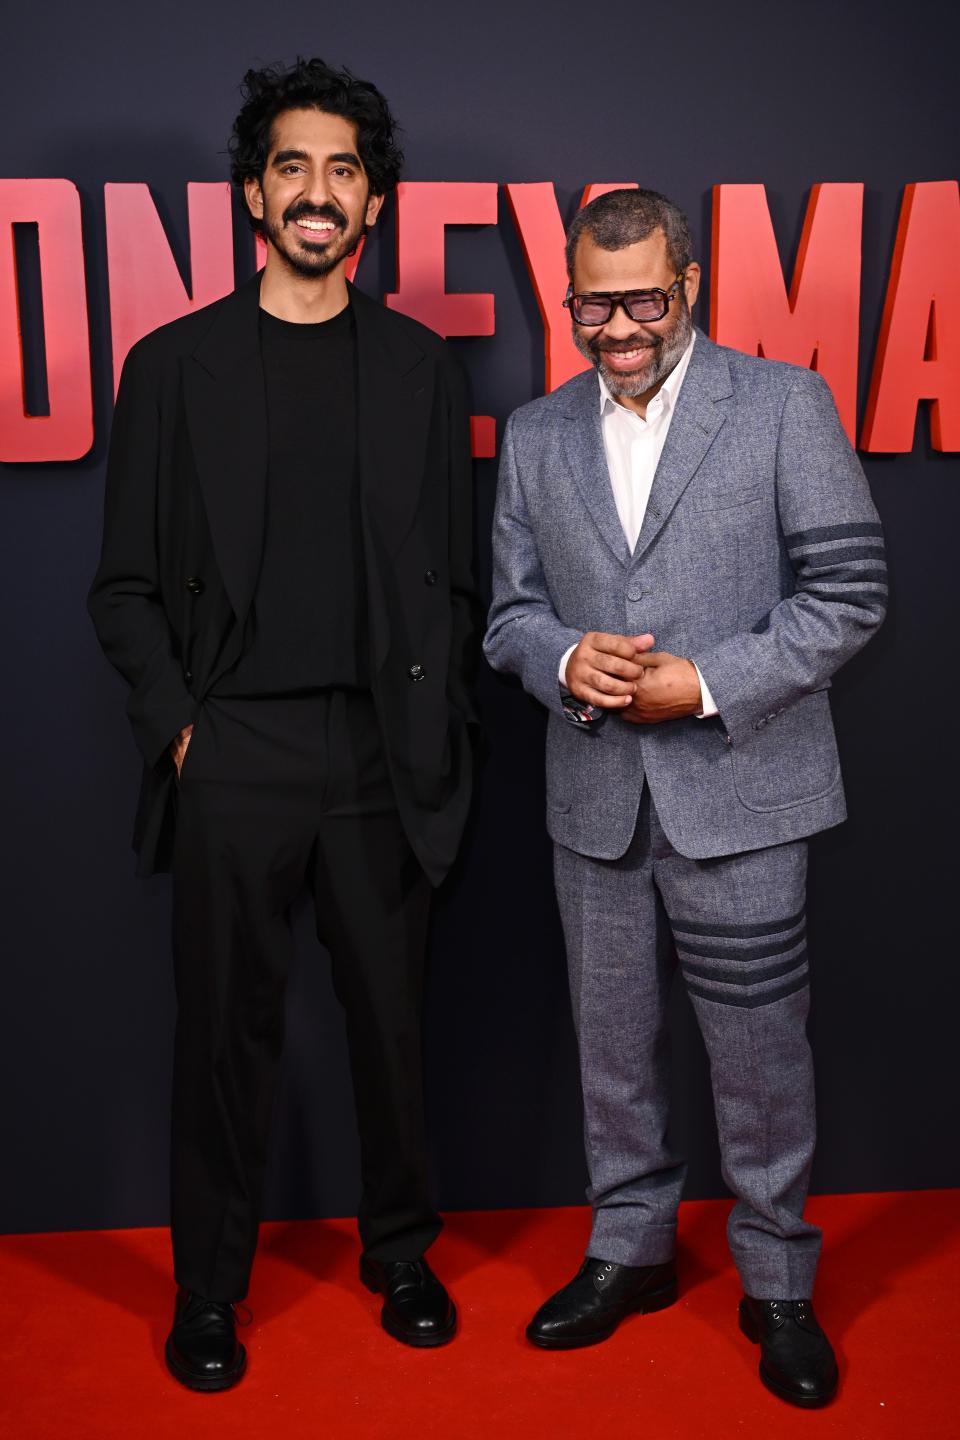 "Monkey Man" producer Jordan Peele, right, with Dev Patel at the London premiere, felt strongly that the movie should be seen in theaters.